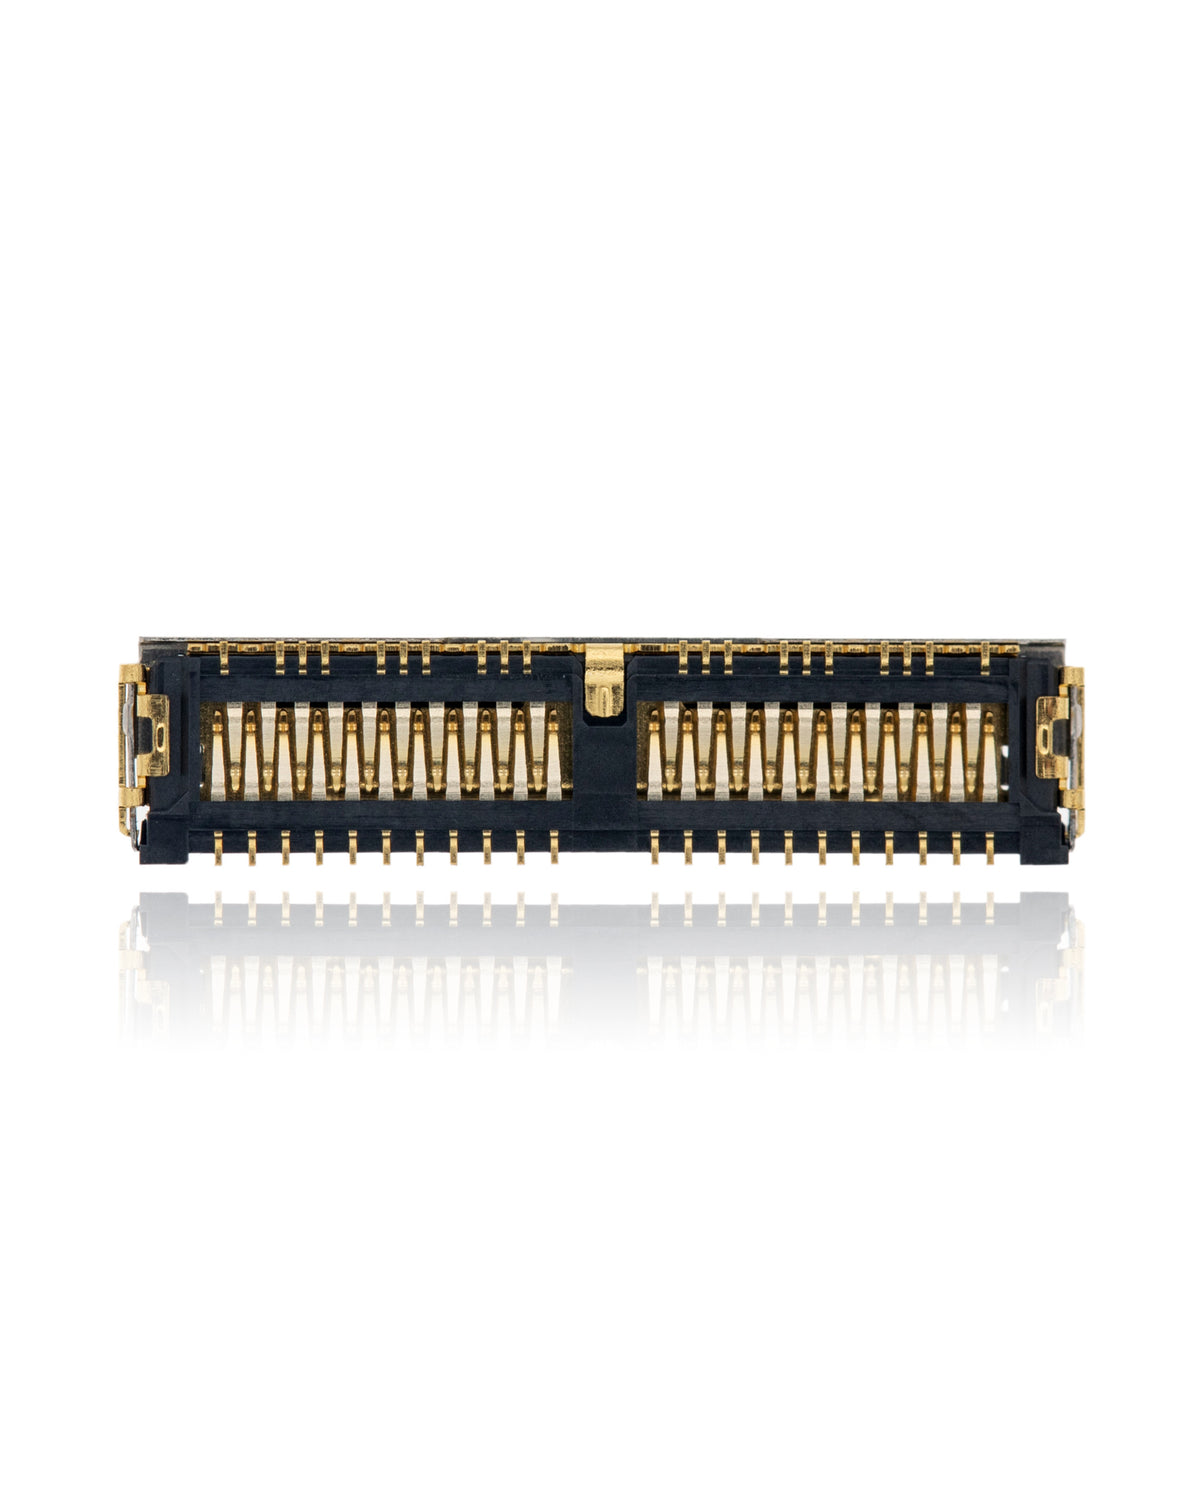 LCD DISPLAY EDP CONNECTOR (ON THE LOGIC BOARD) COMPATIBLE WITH MACBOOK RETINA 12" A1534 (EARLY 2015 / EARLY 2016 / MID 2017) (CFPA342-0250F: 518S00013 / J8300: 42 PIN)